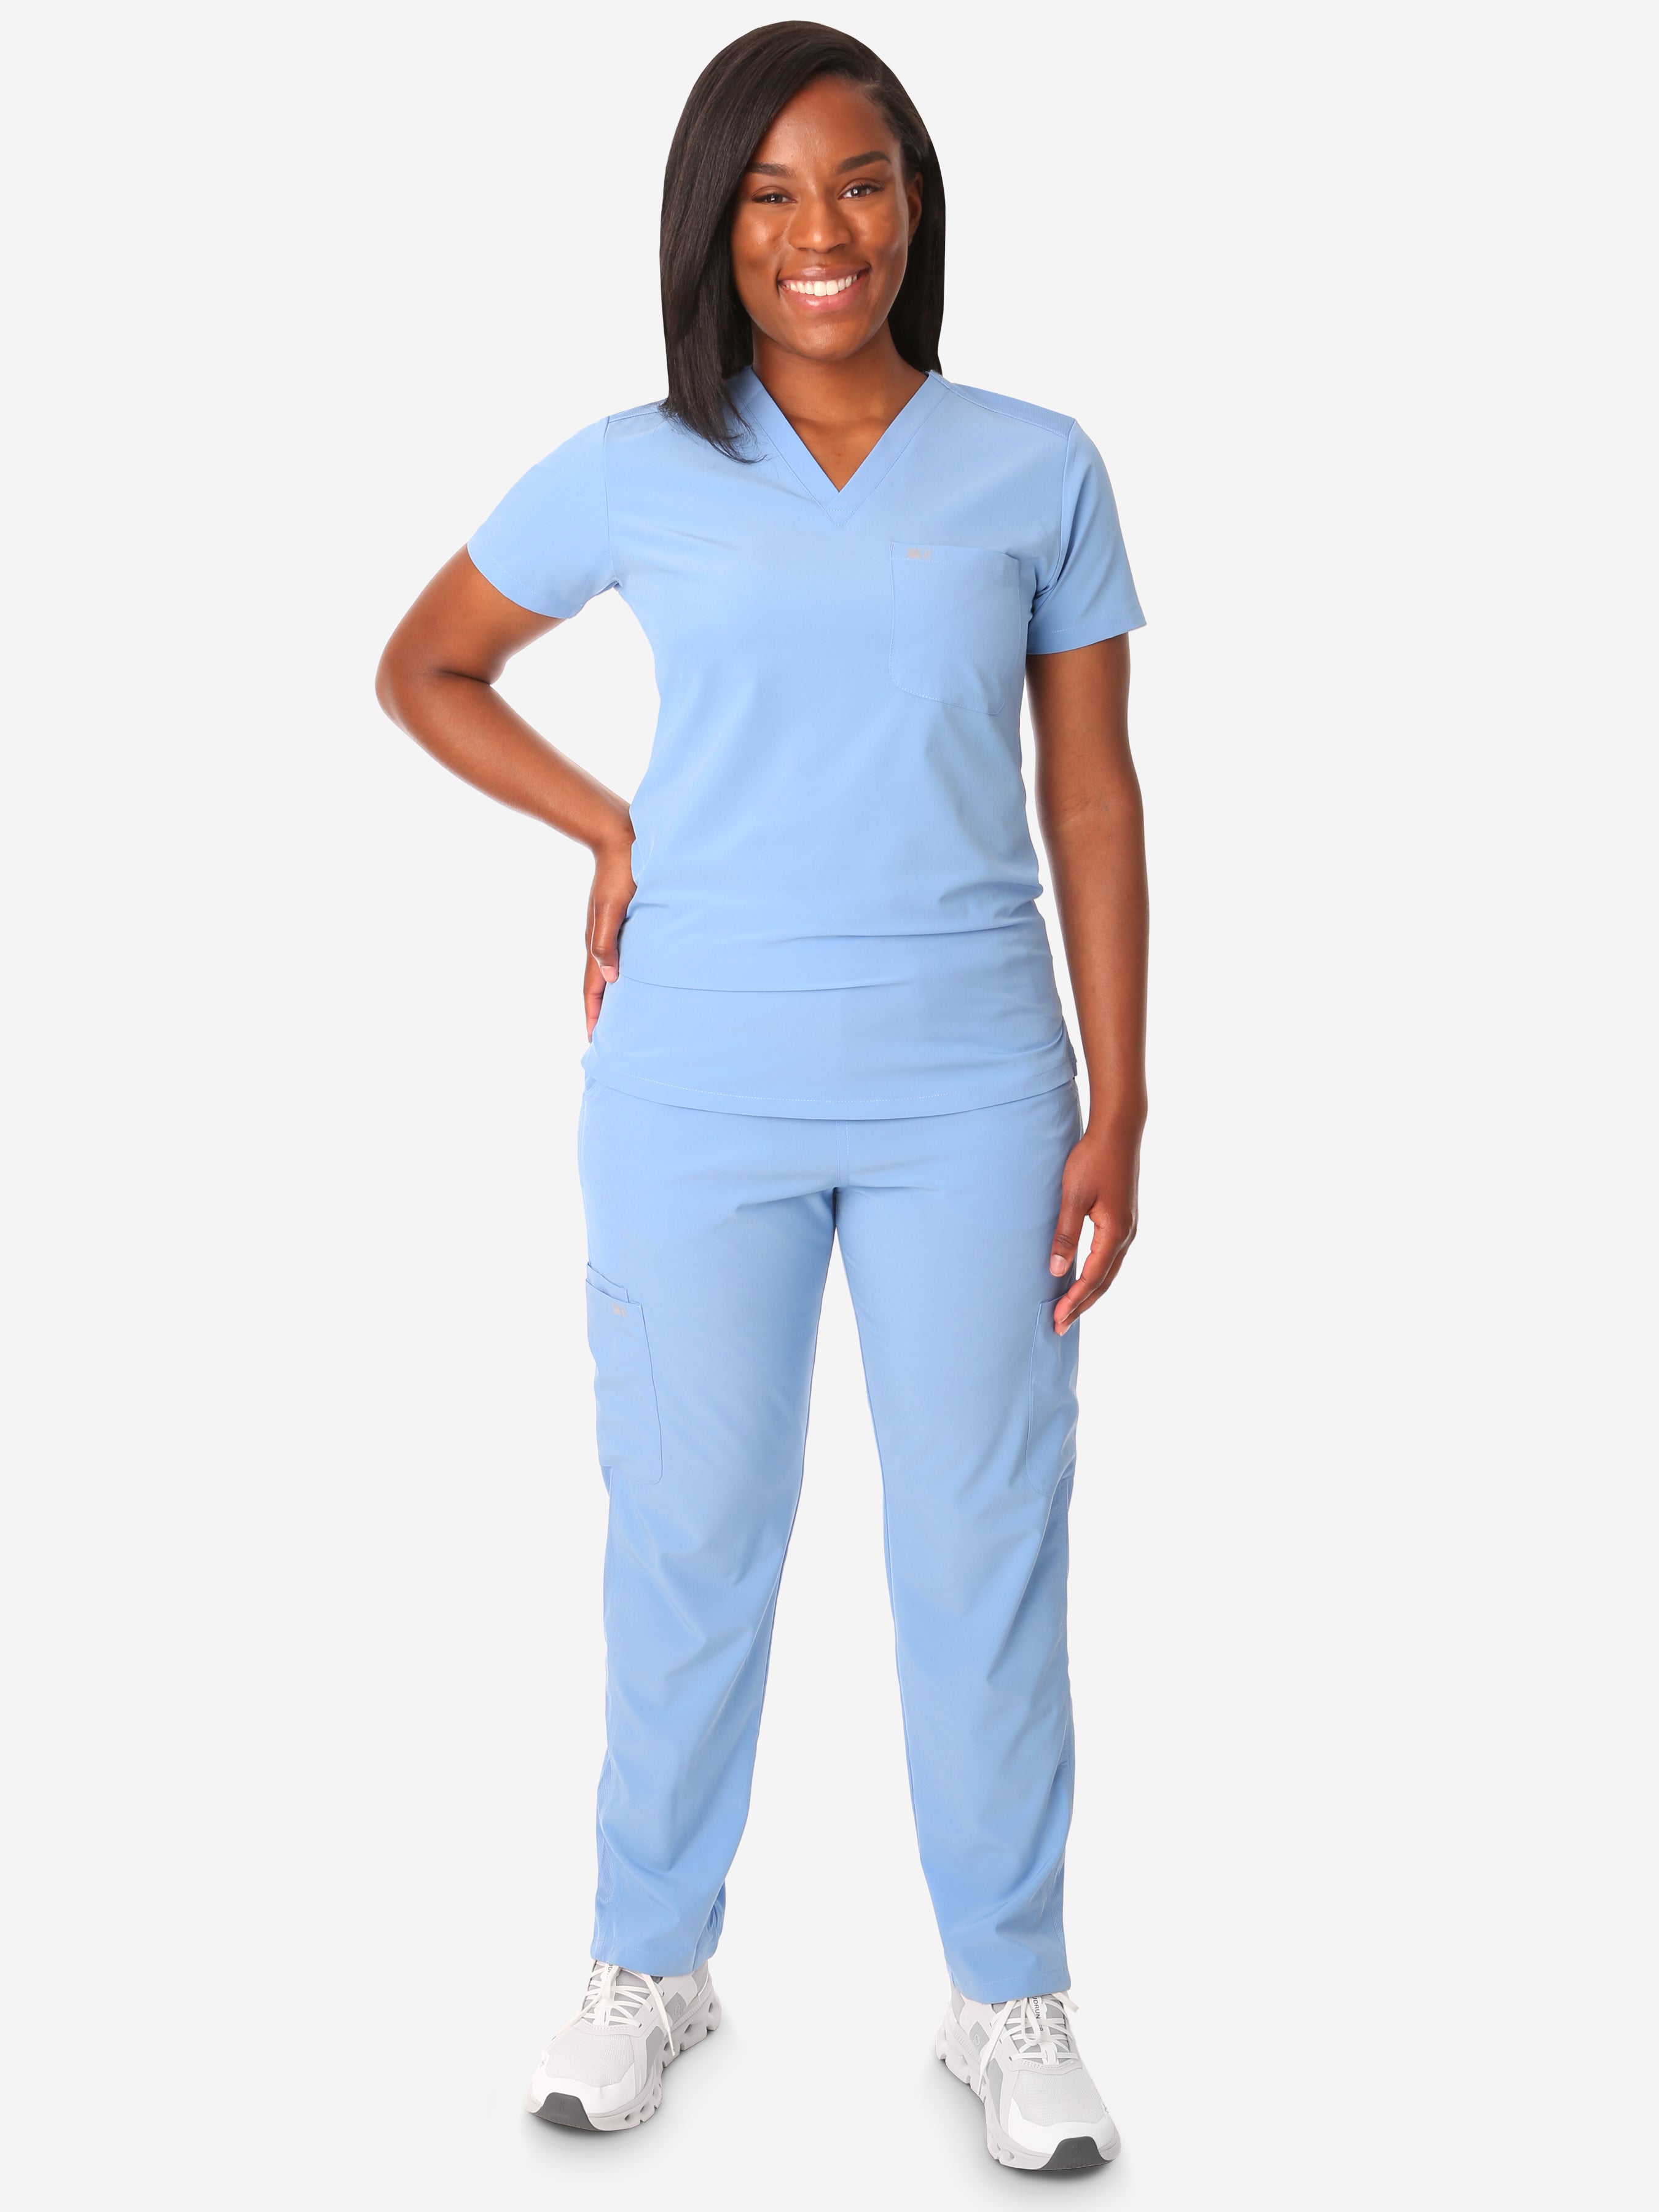 TiScrubs Women&#39;s Stretch Ceil Blue One-Pocket Tuckable Scrub Top and 9-Pocket Pants Untucked  Full Body Front